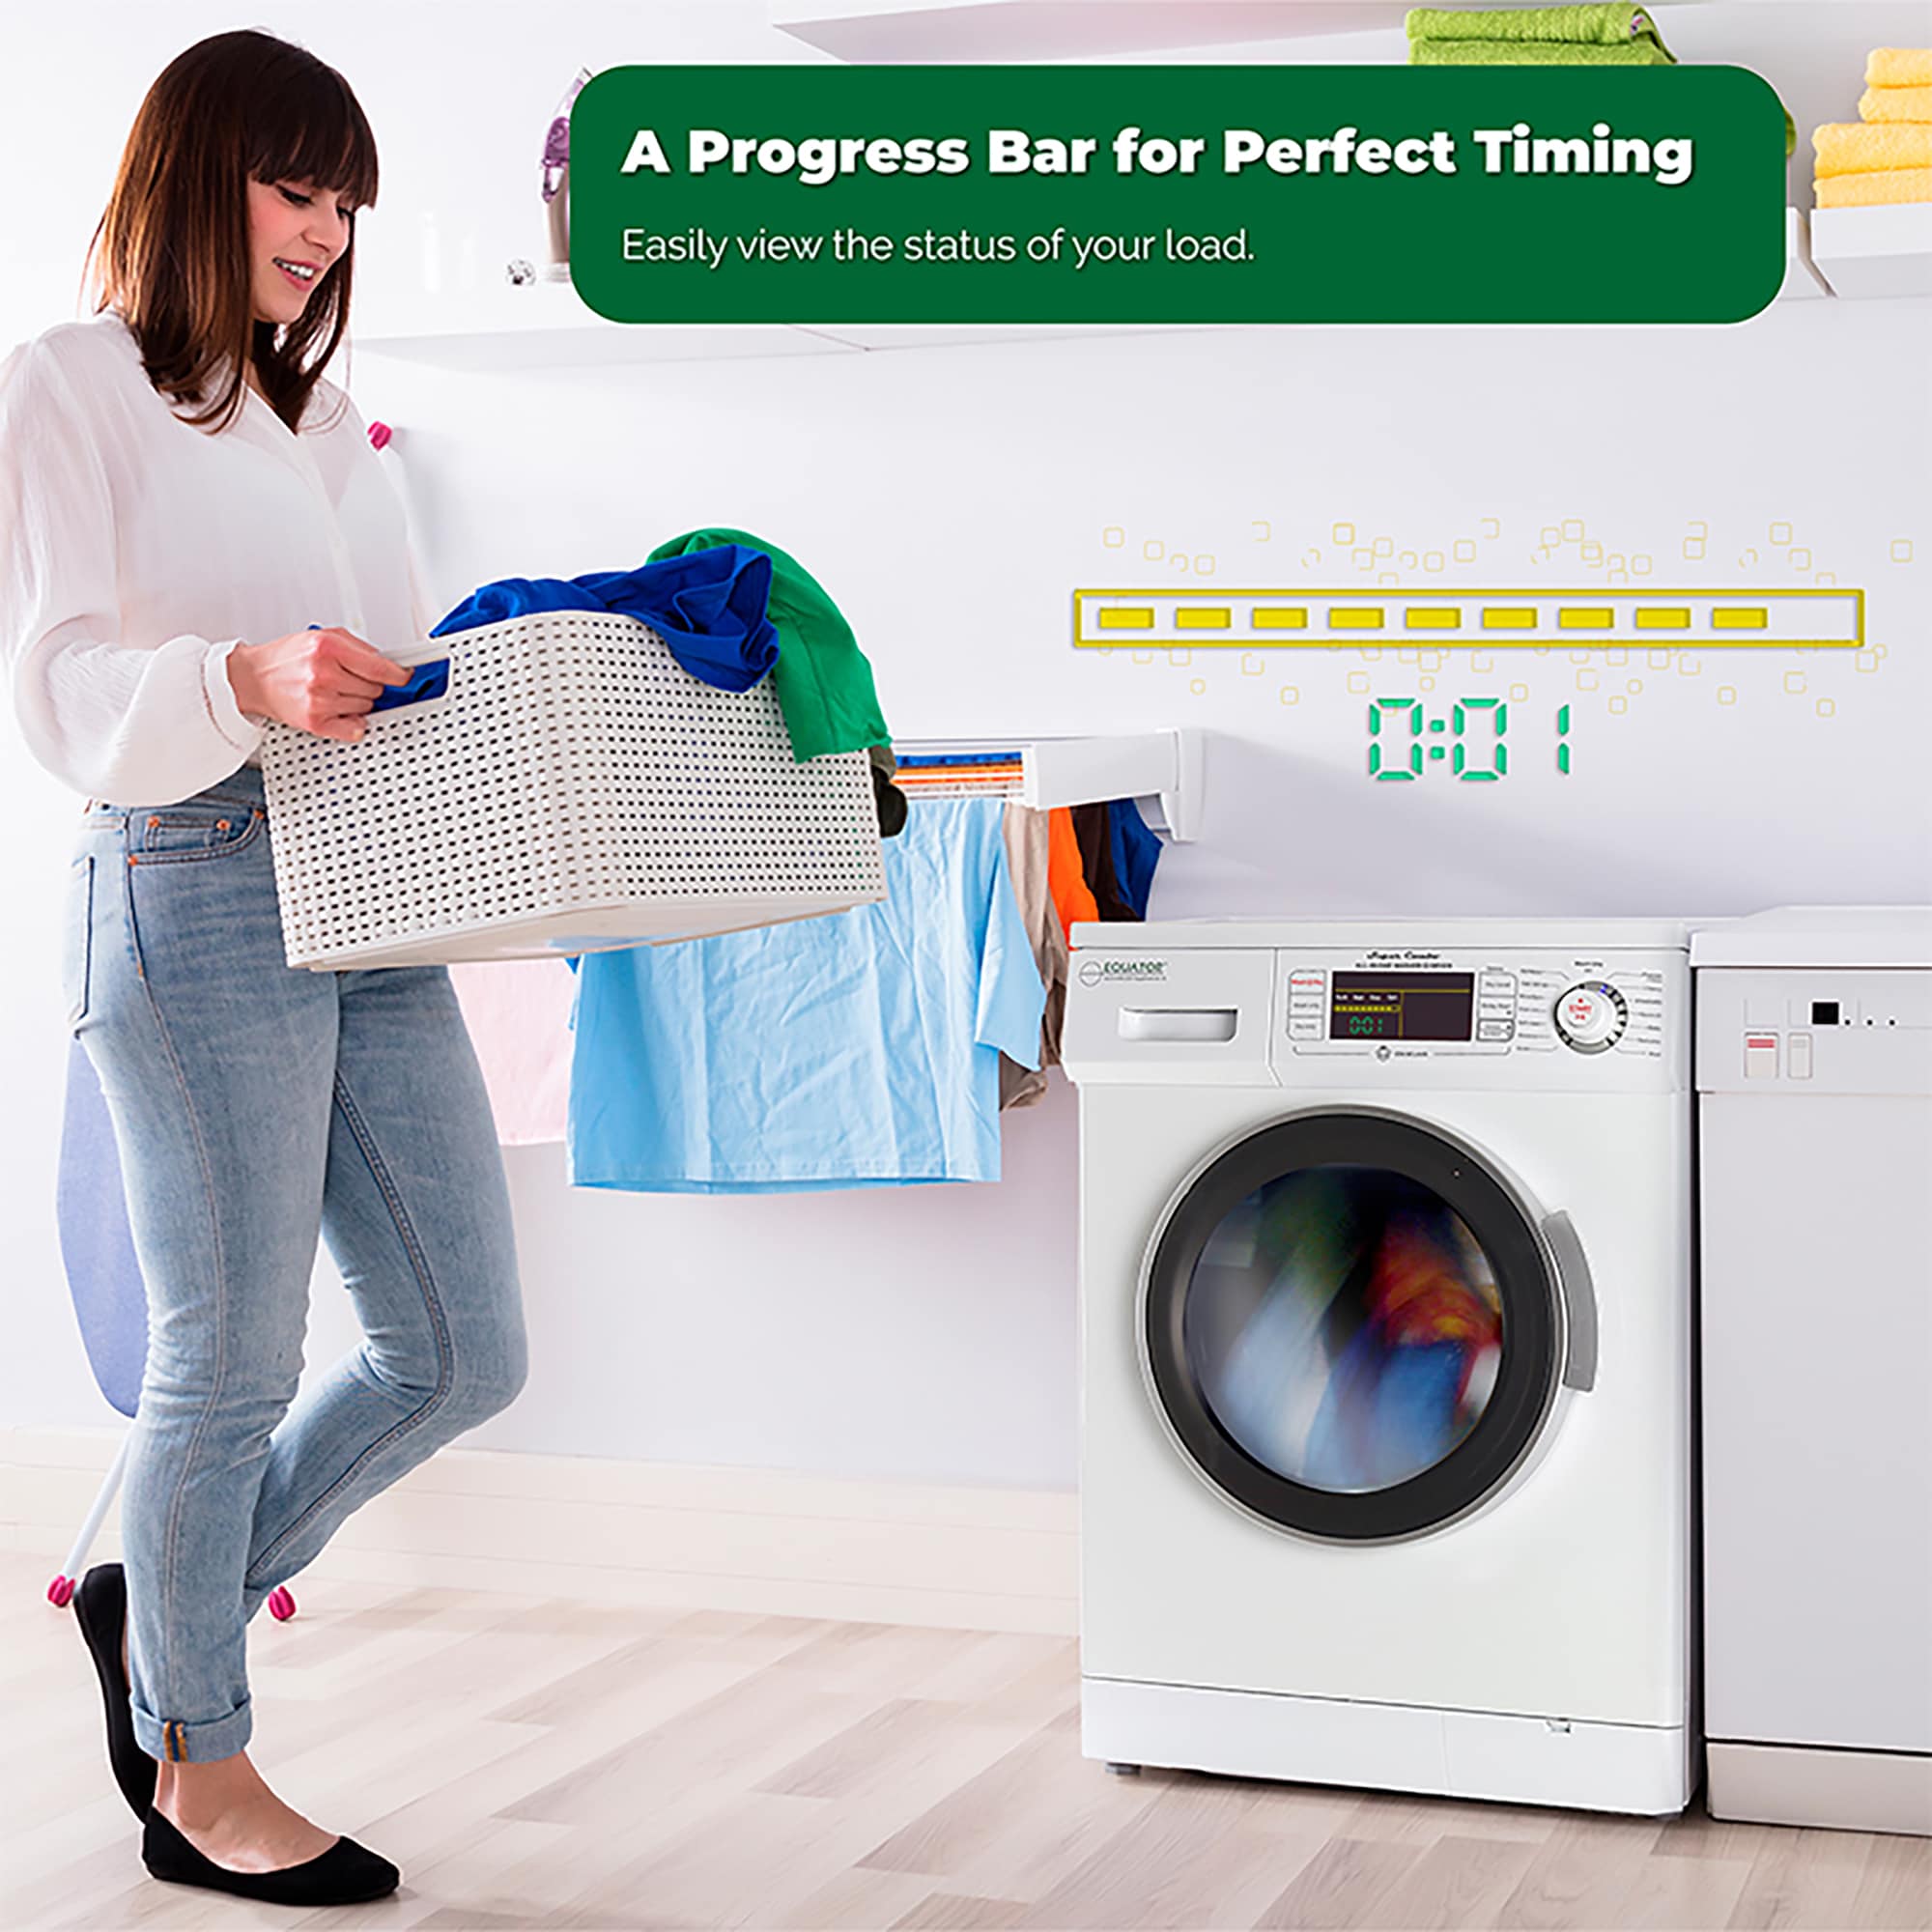 onthisday Wad-Free® works in BOTH the washer and dryer to solve